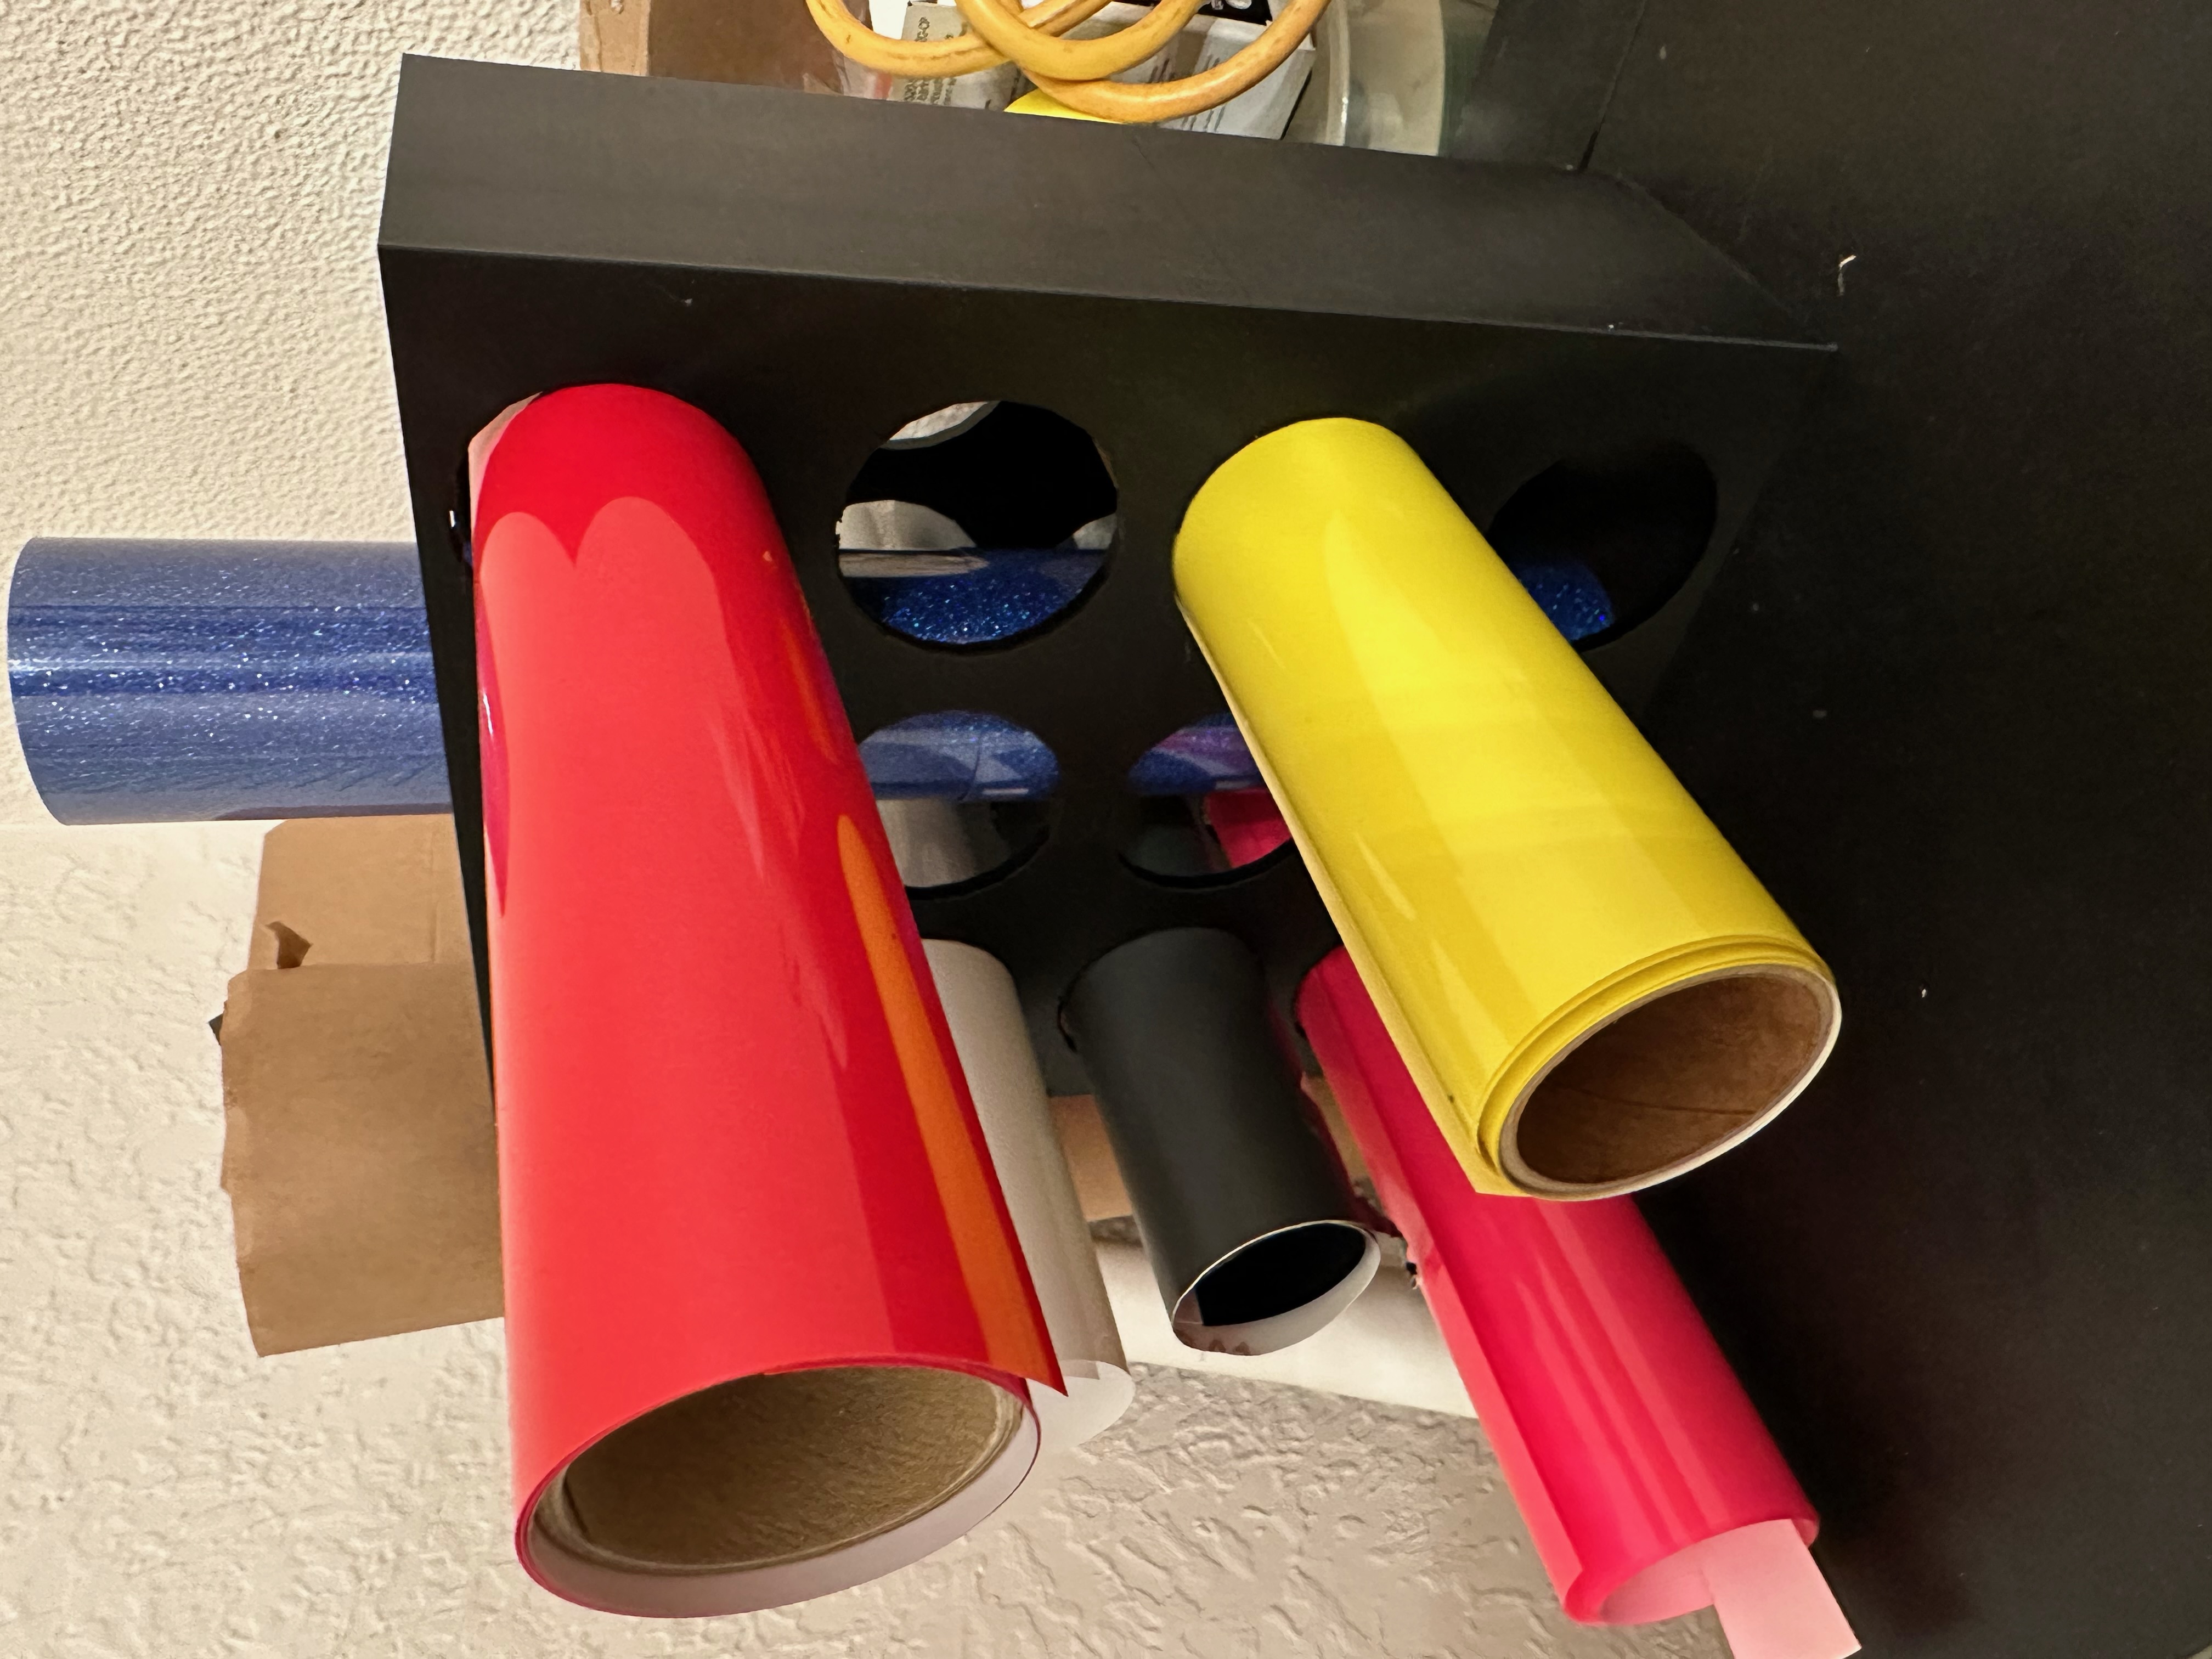 Vinyl Roll Holder Cricut Silhouette Cameo (no supports) by UrXBf